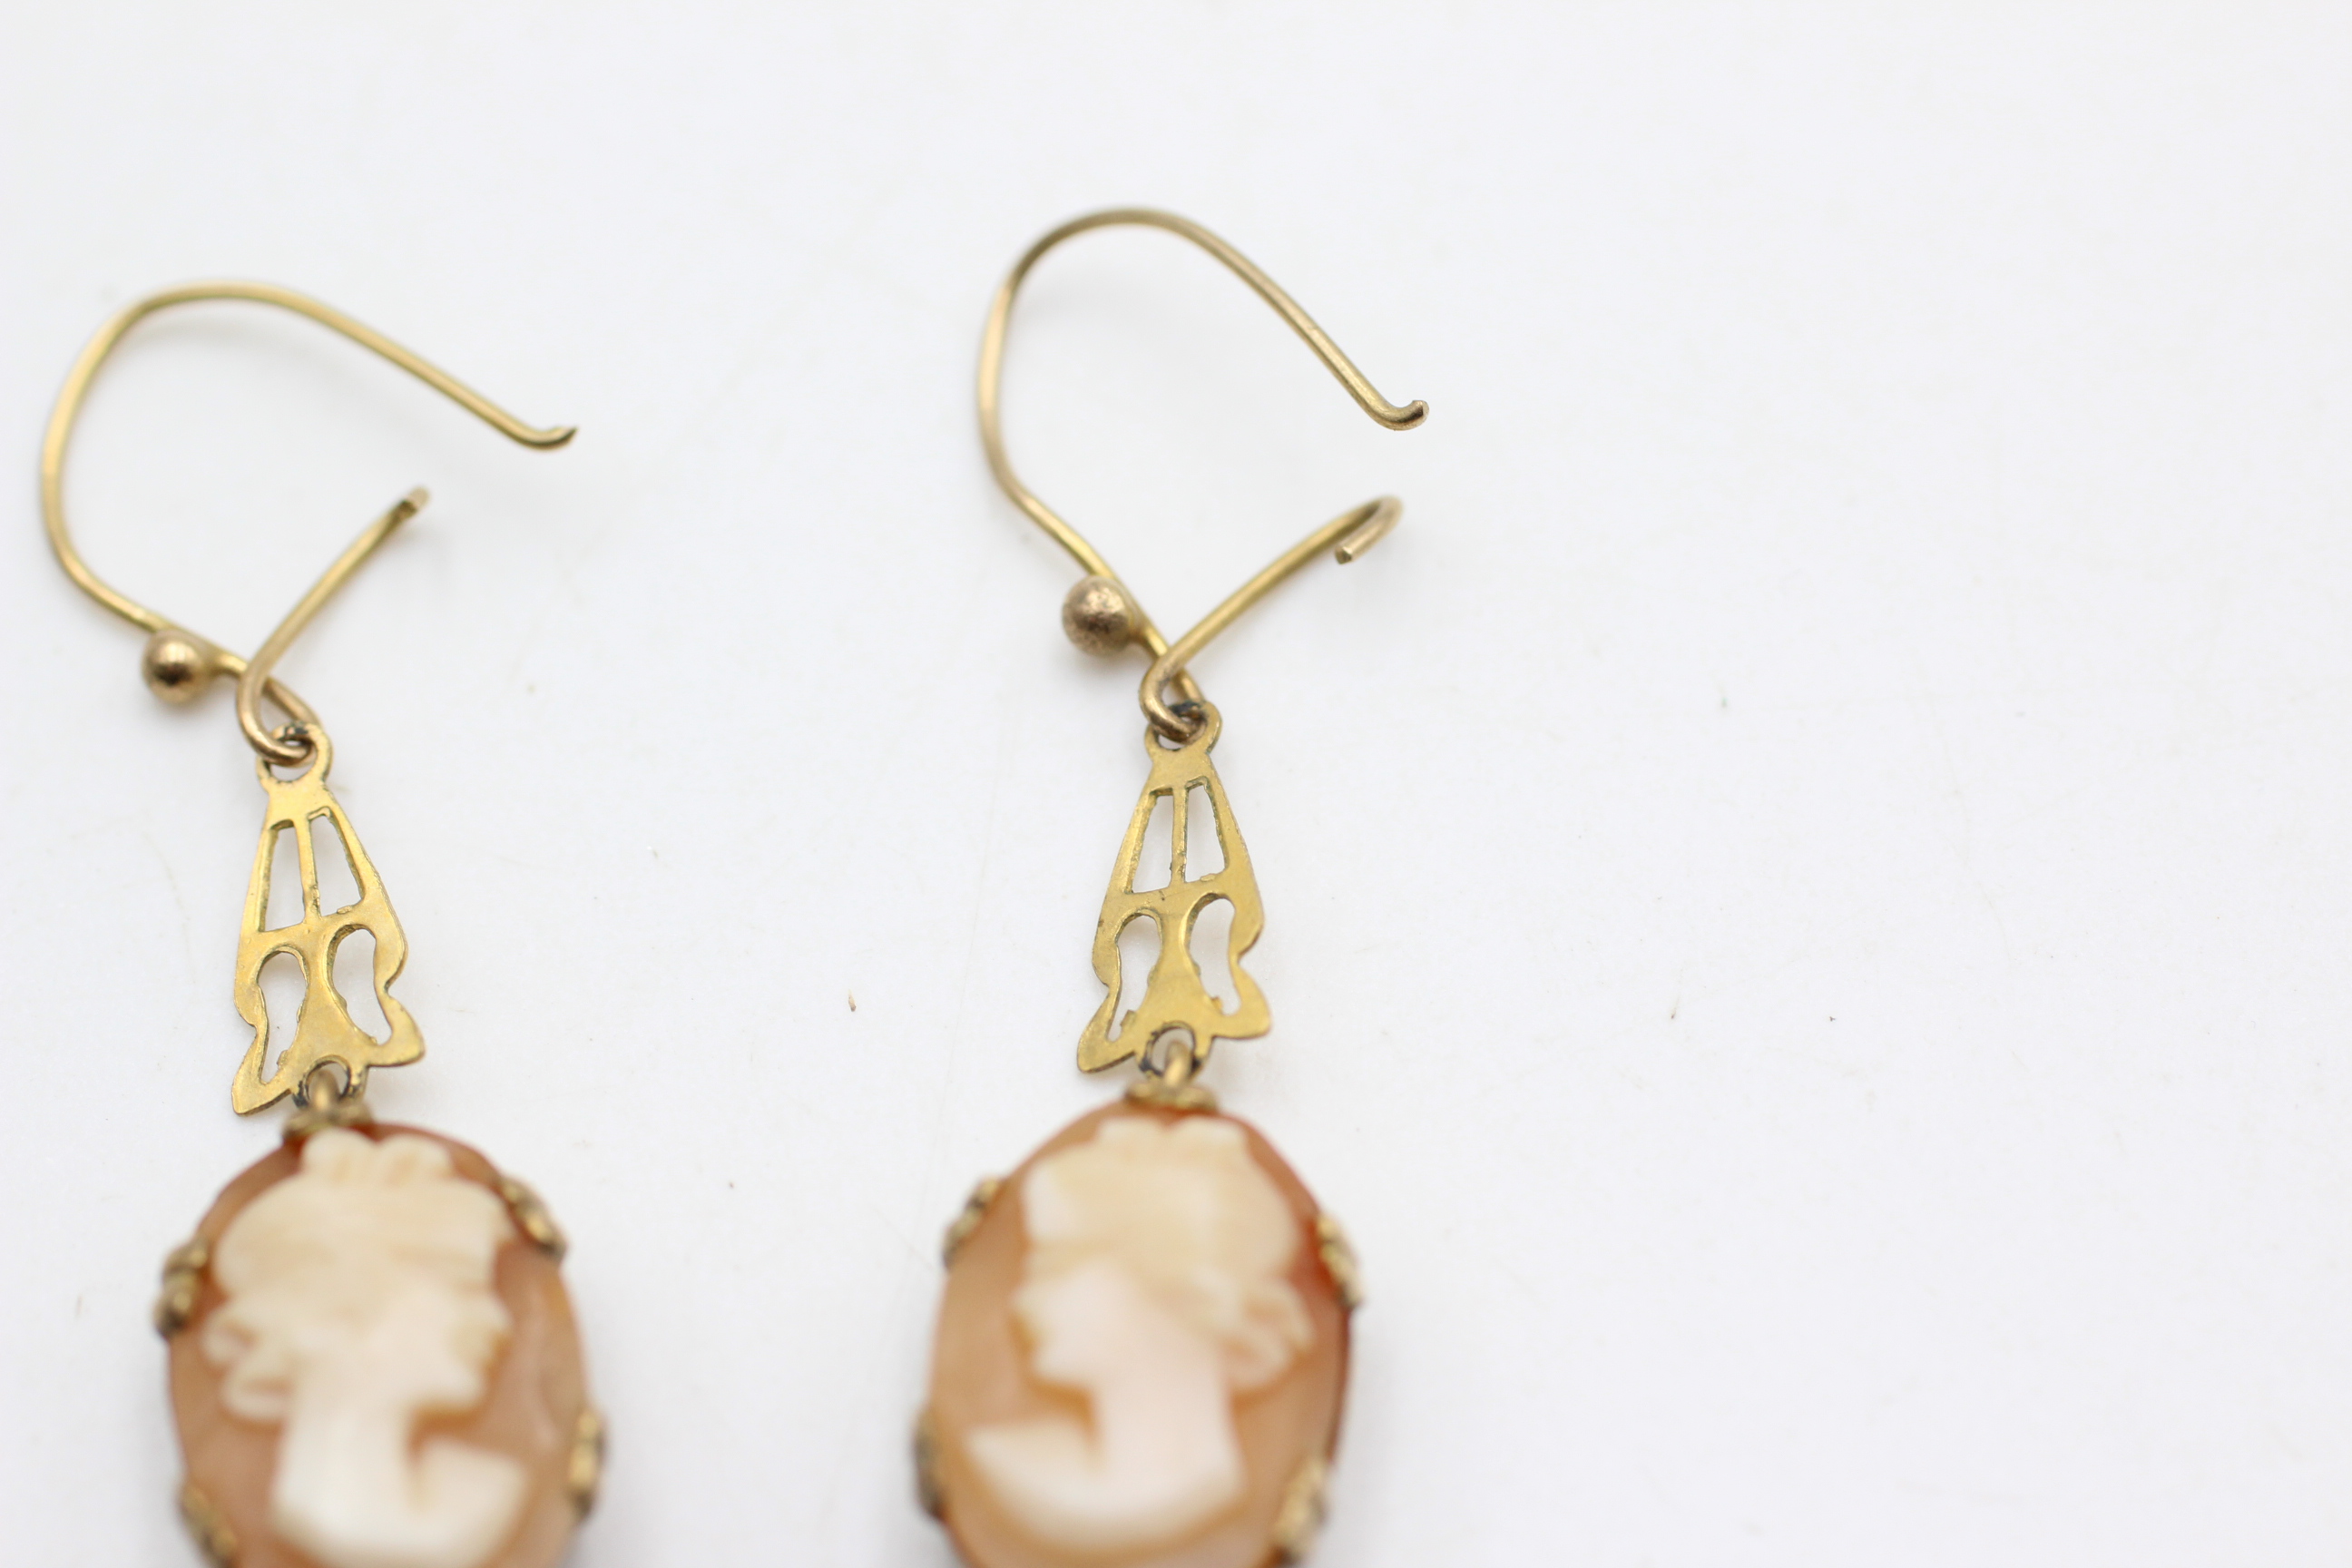 9ct gold vintage cameo drop earrings (2.8g) - Image 5 of 5